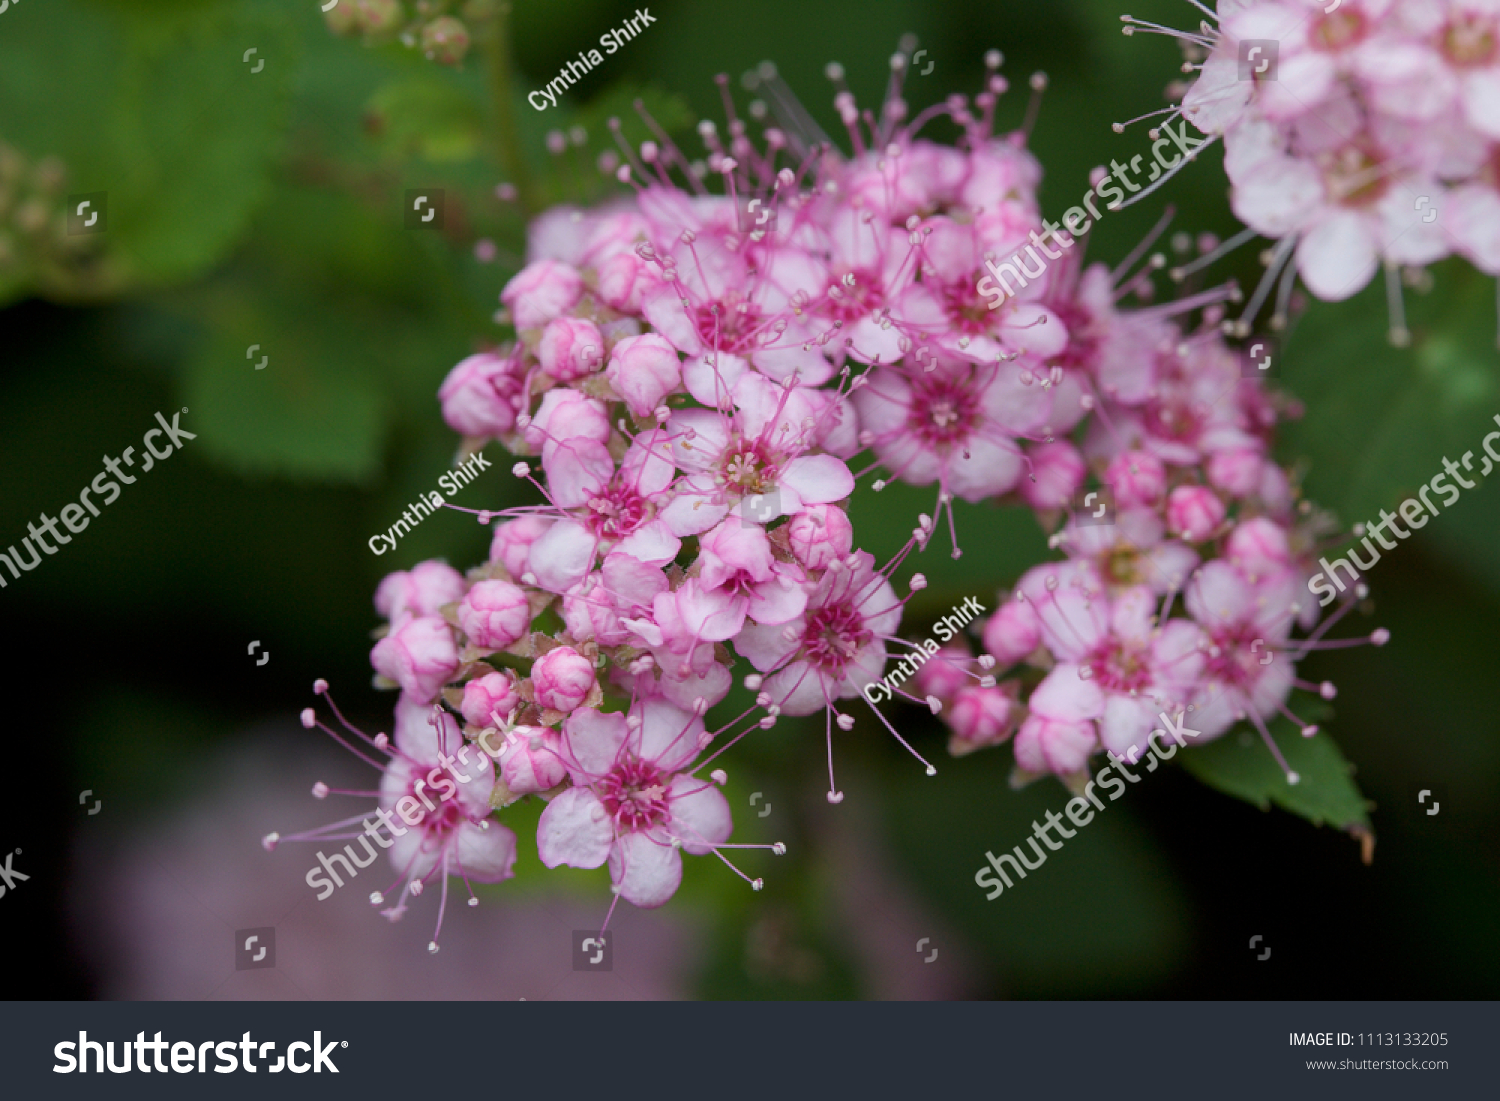 Close up macro view of newly blossoming tiny bright pink compact spirea (Spiraea) flower clusters #1113133205